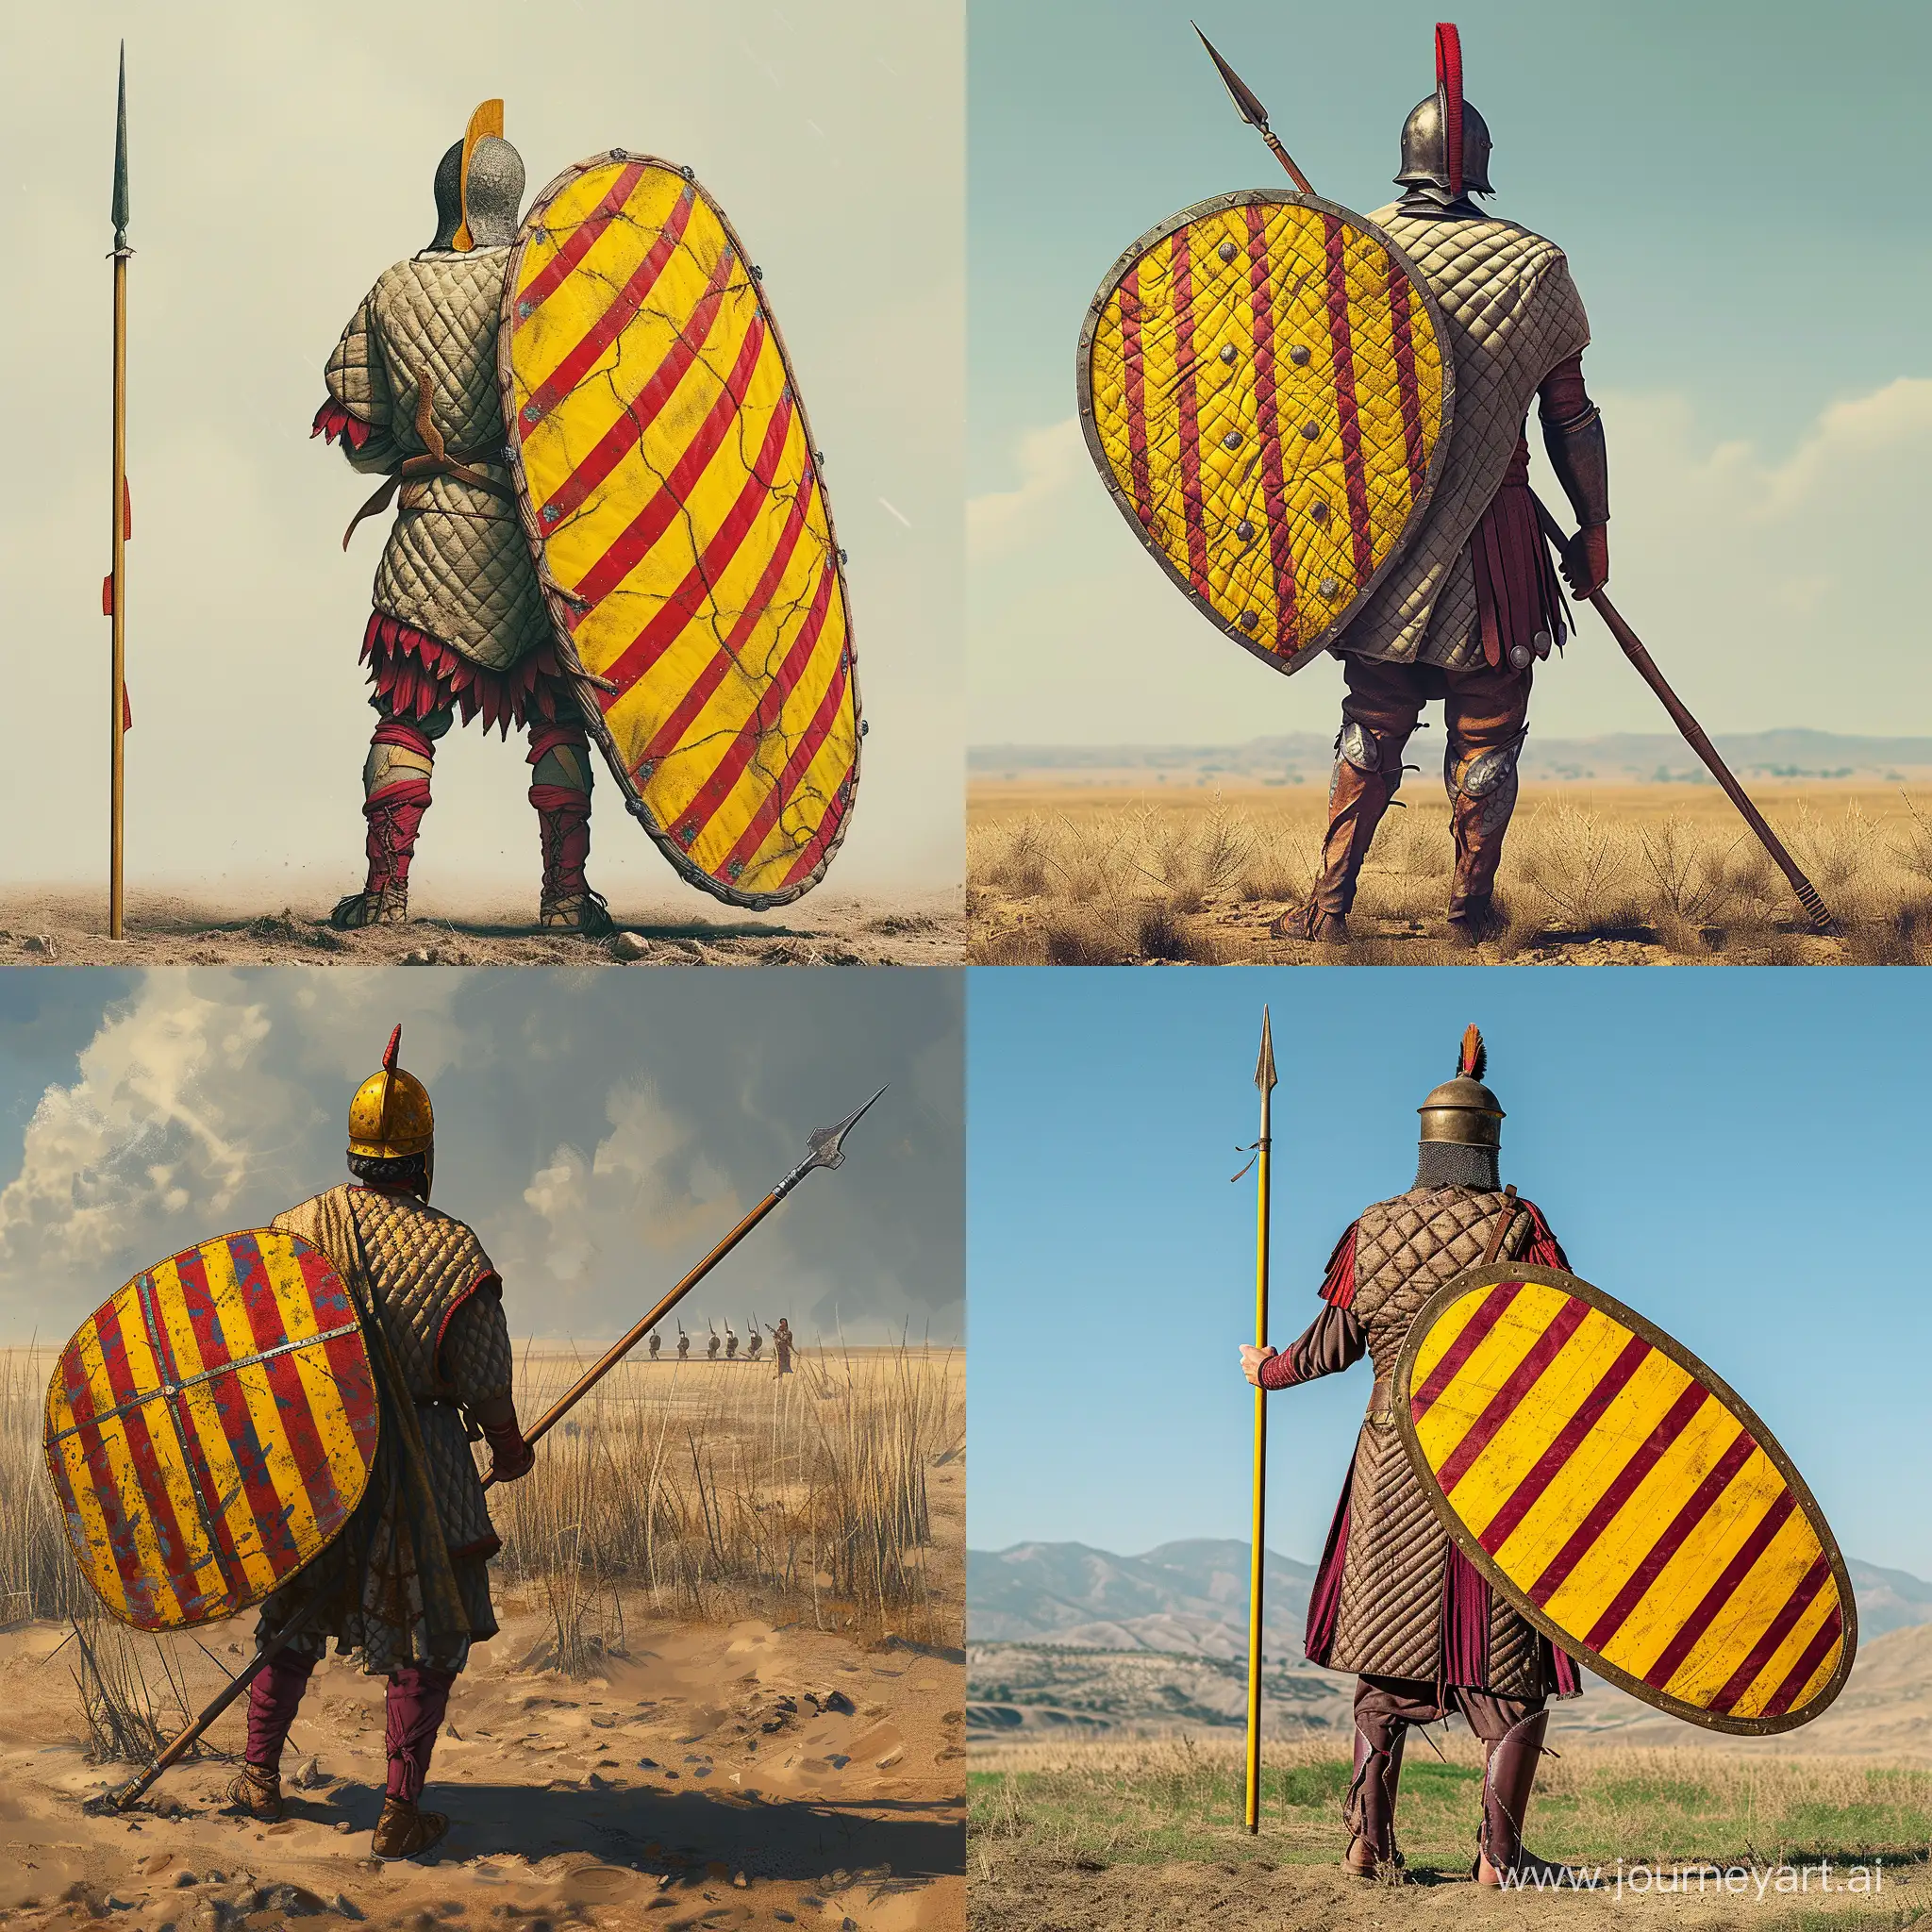 Achaemenid Sparabara soldier at battle field. Wearing quilted linen cuirass. Equipping large yellow-red striped rectangle shield and a long spear. Realistic image.